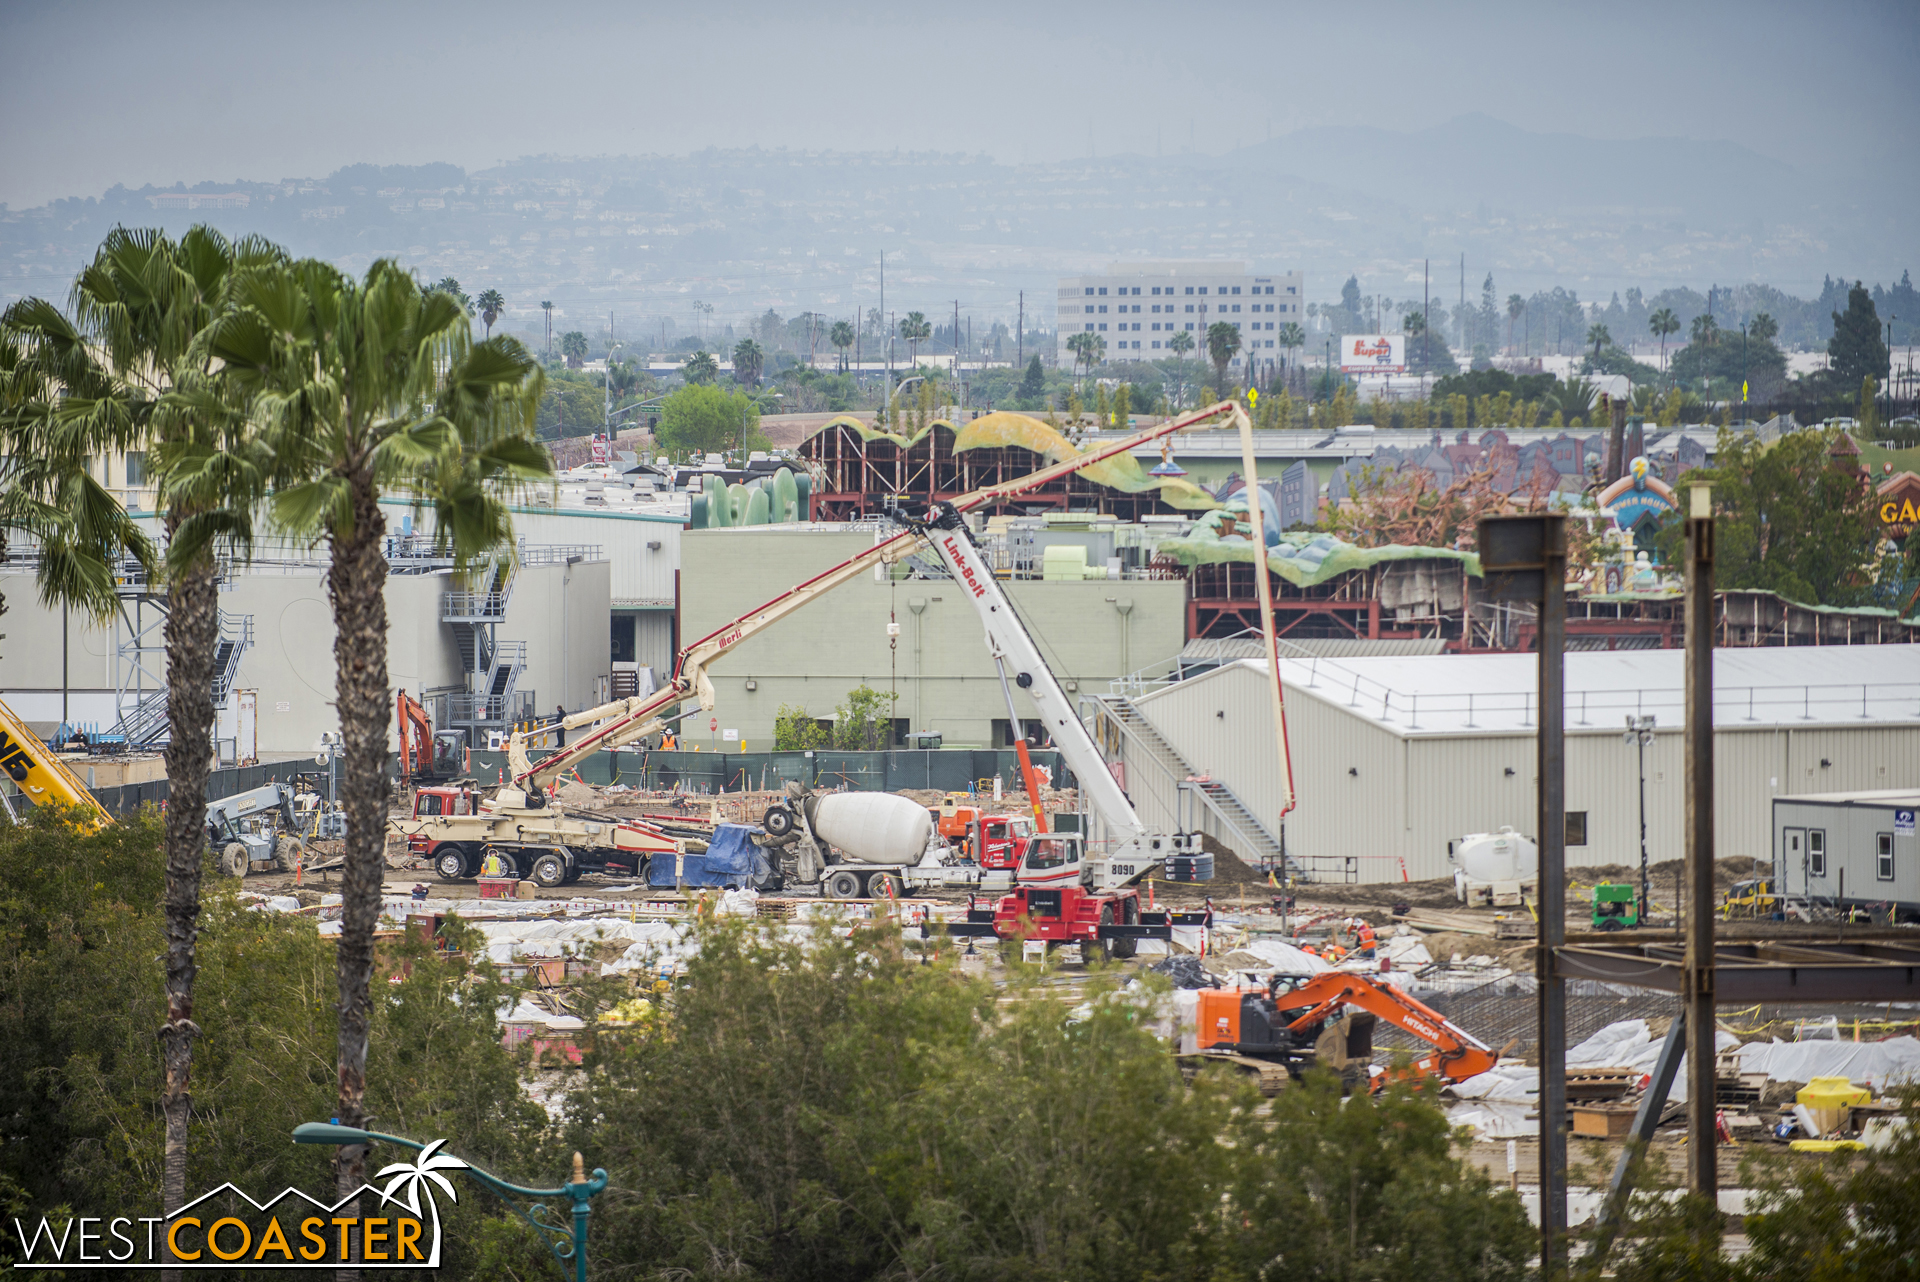  Over in the back corner, near Mickey's Toontown, concrete trucks appear to be pouring concrete for another building. 